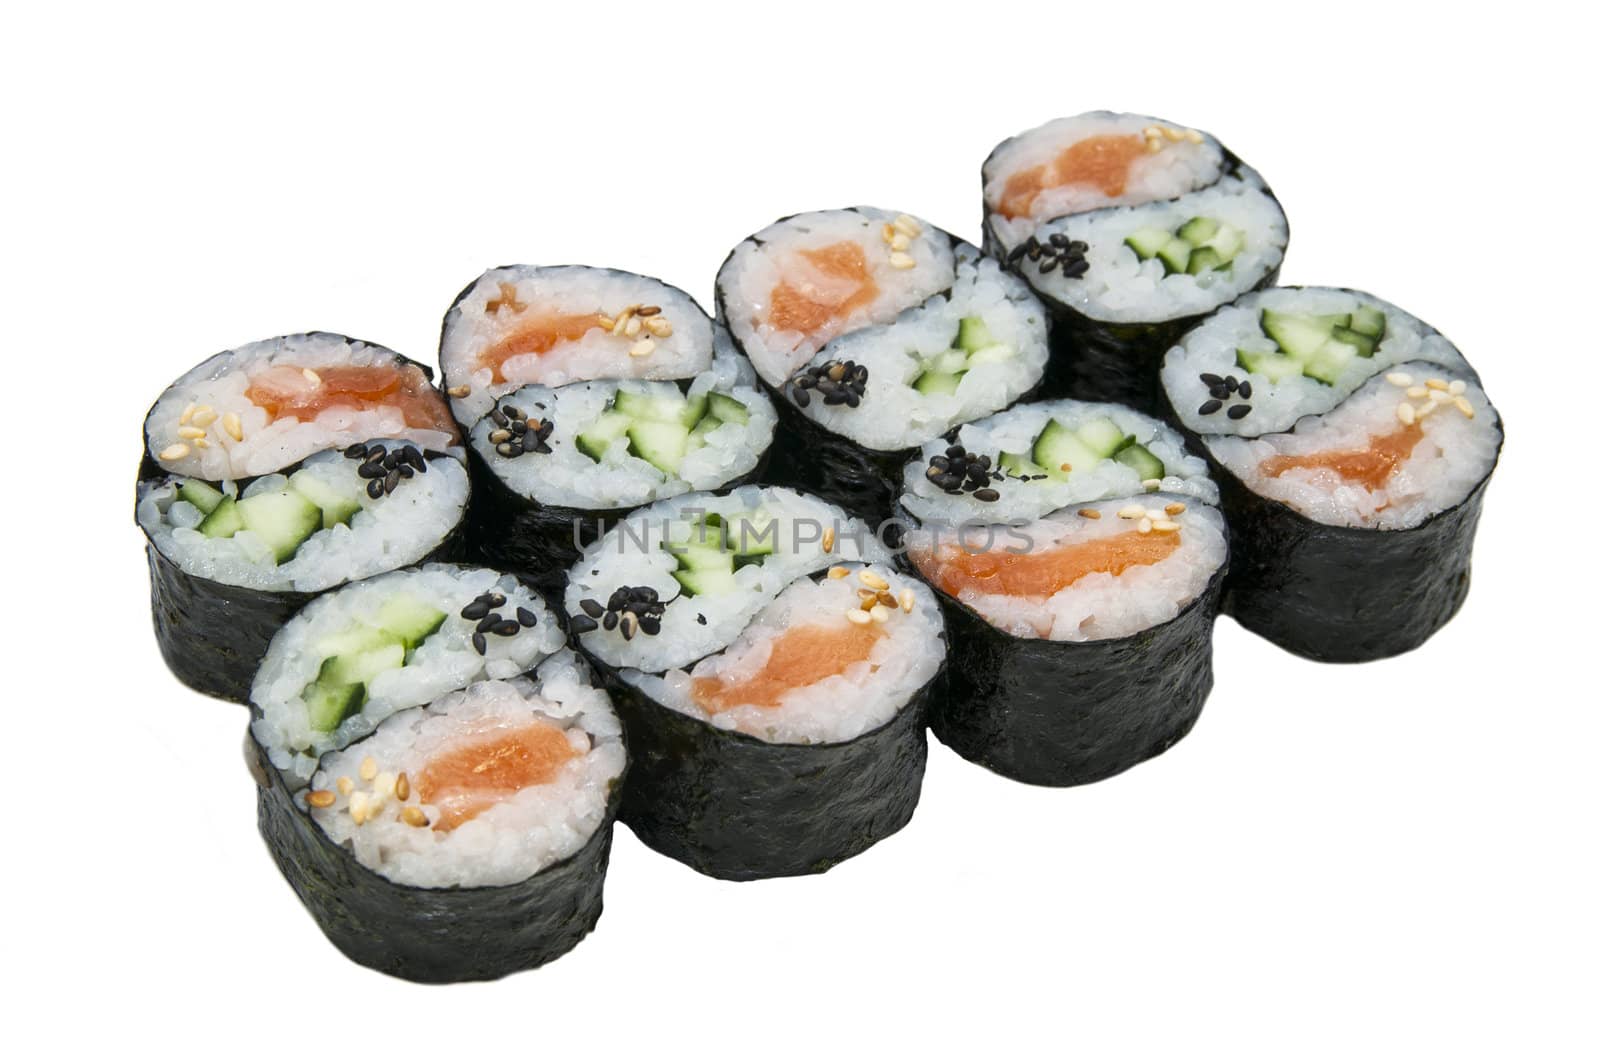 Japanese rolls by Lester120